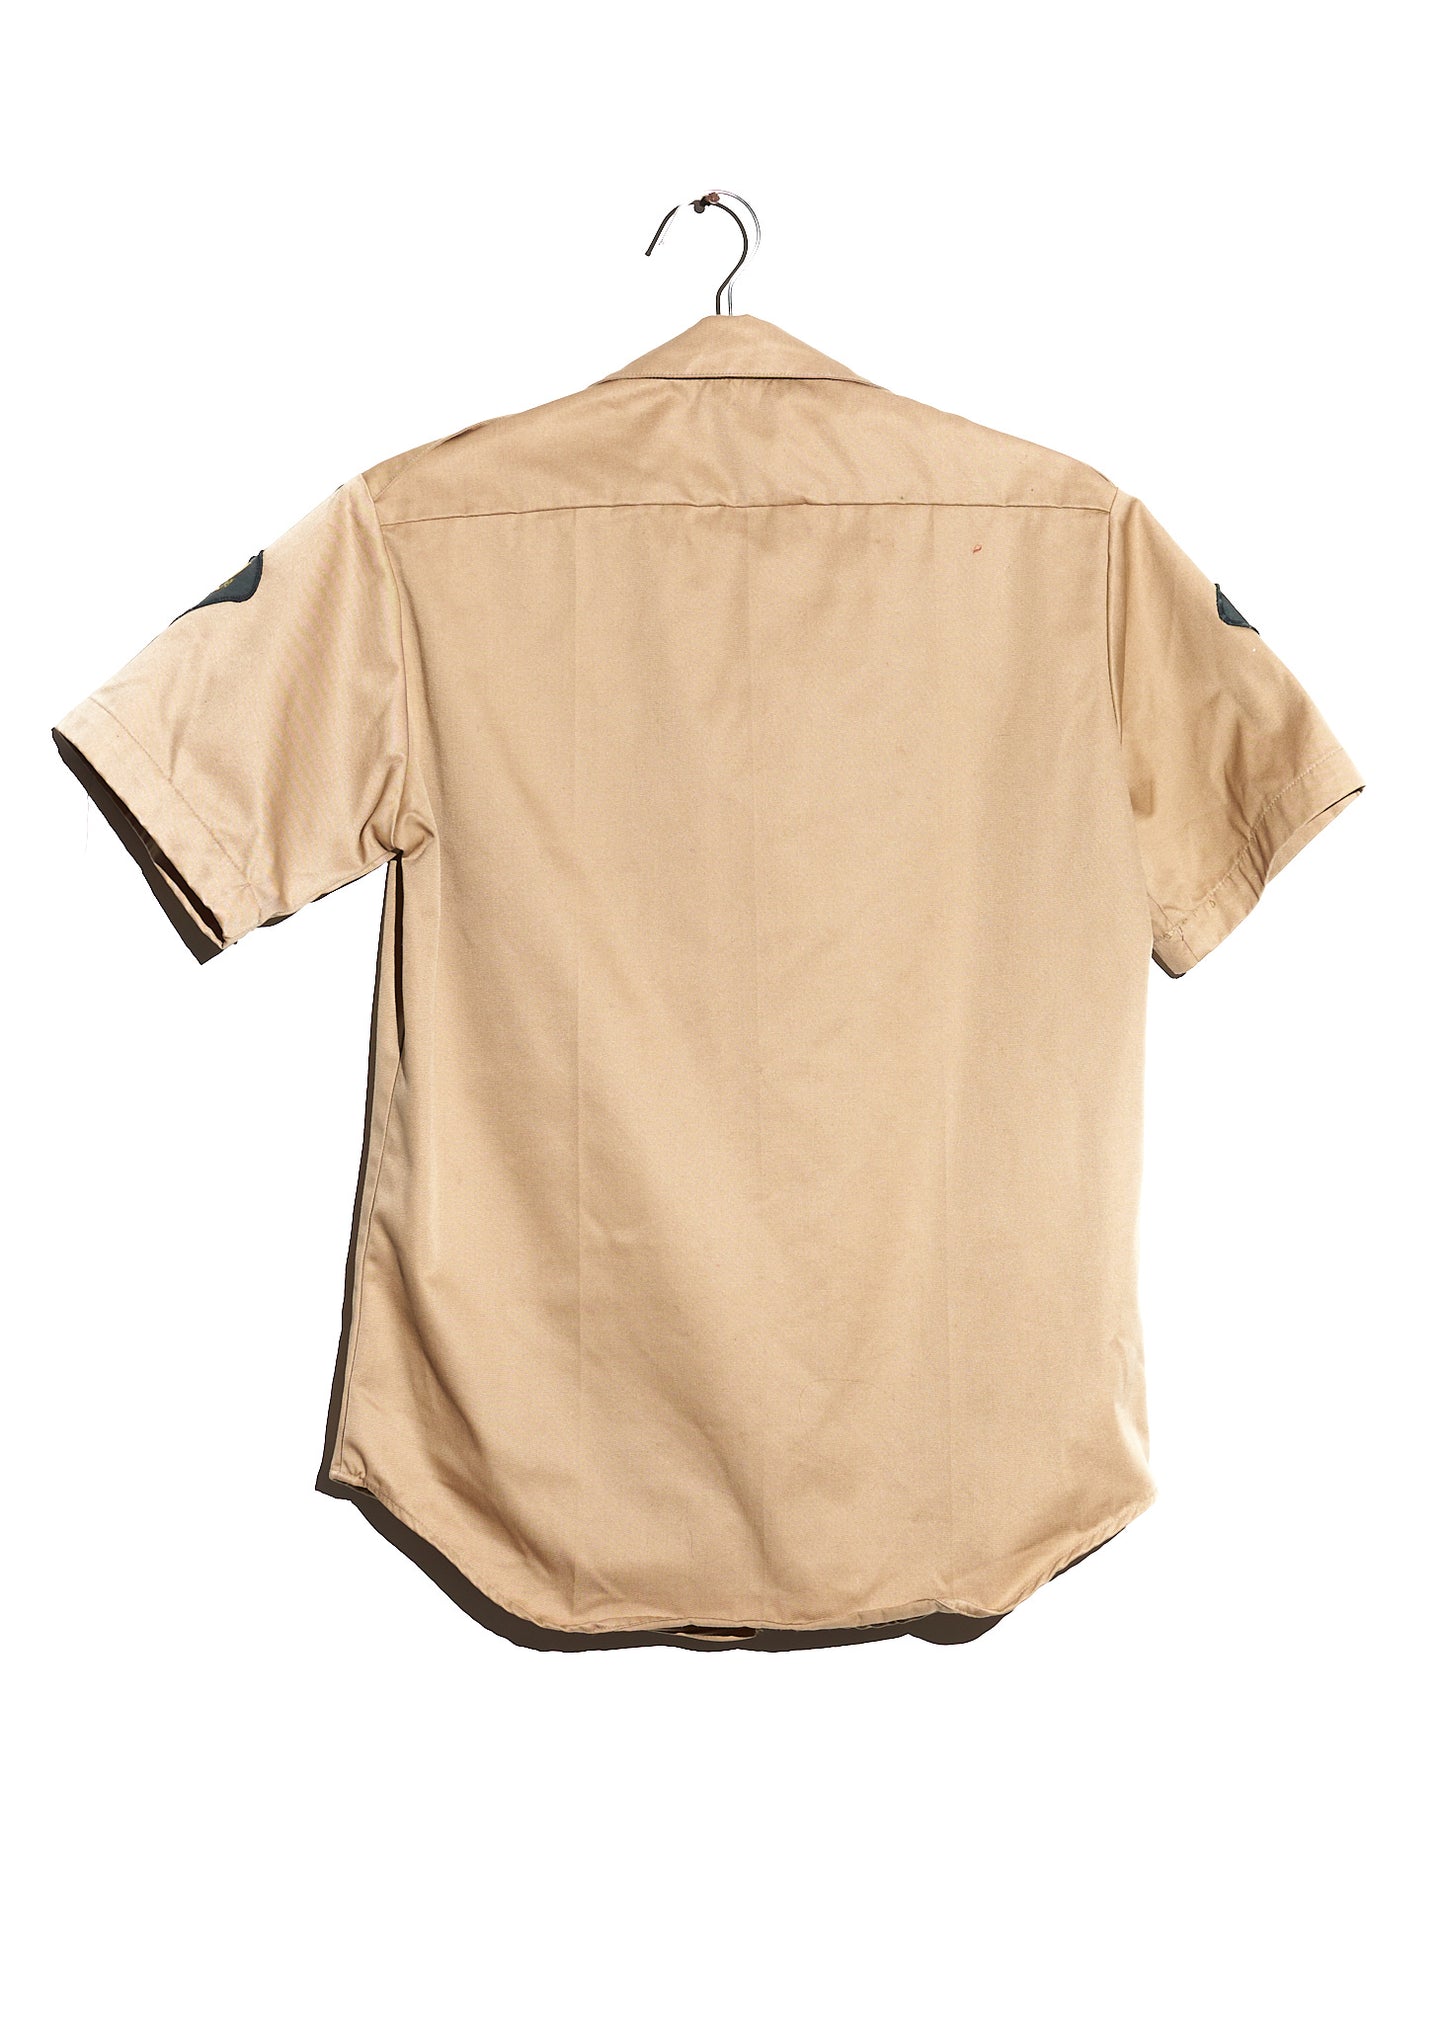 Beige (with Patches) Short Sleeve Shirt